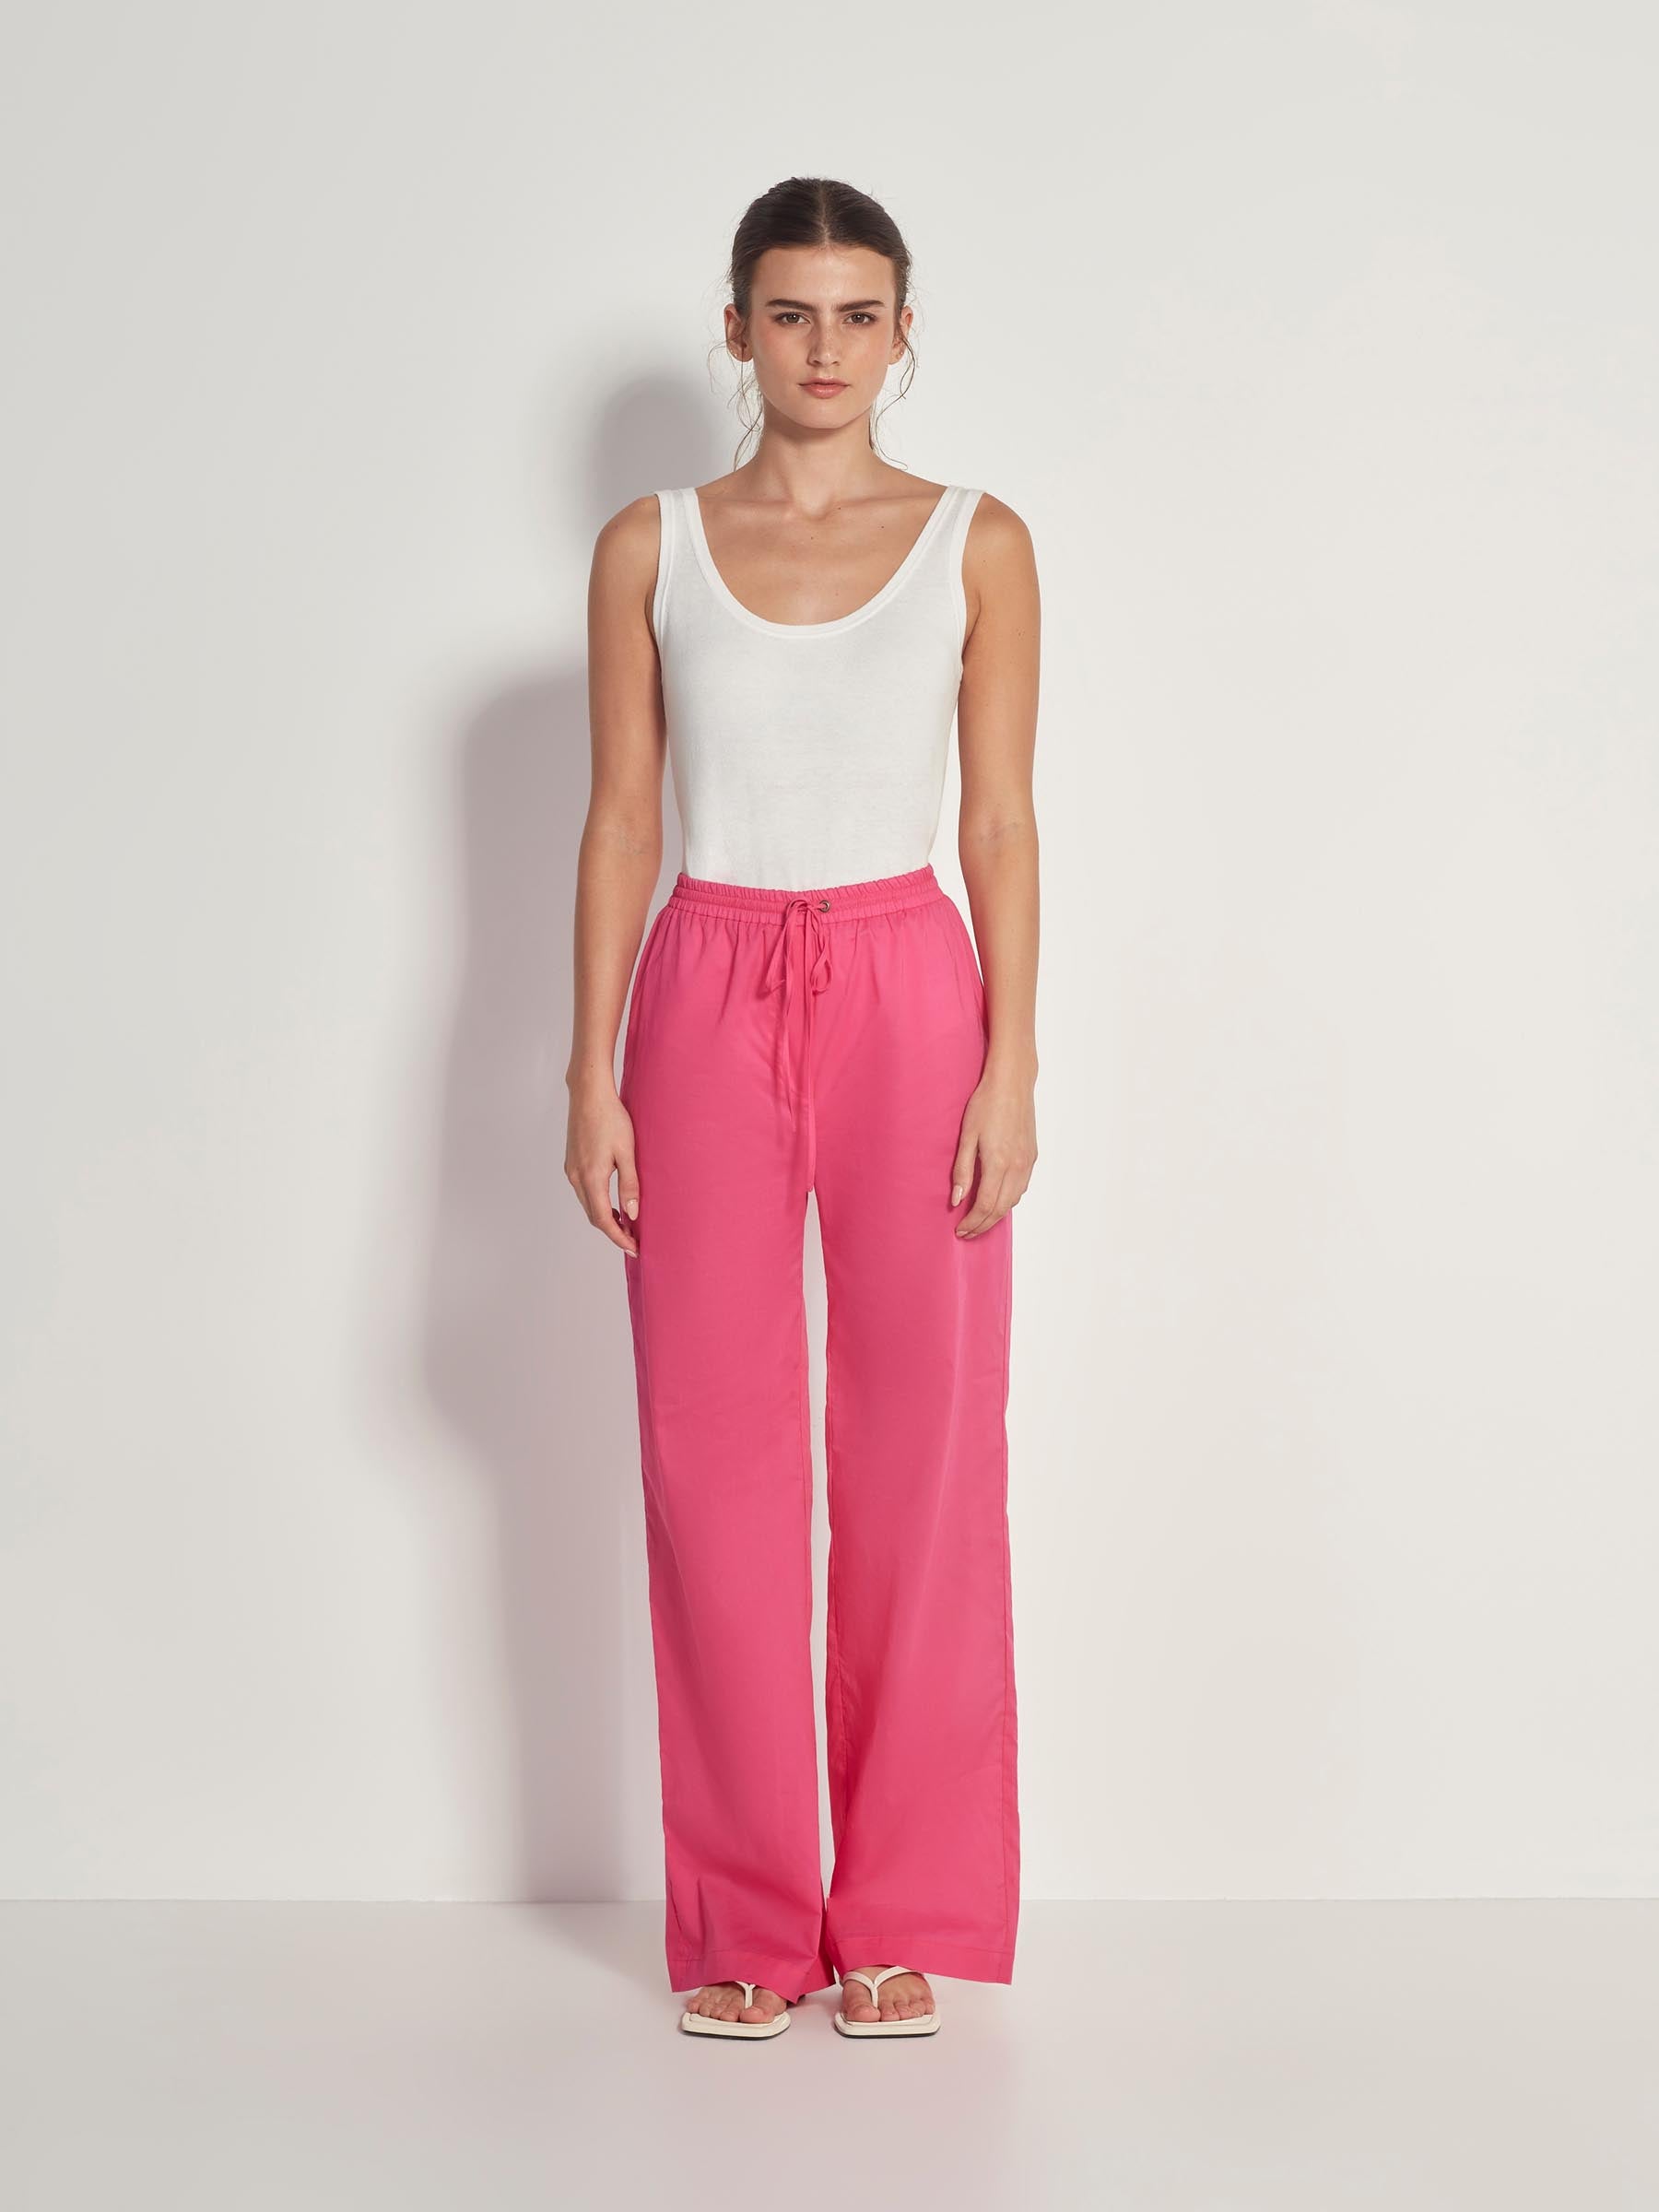 White cotton Sirmione trousers - Made in Italy